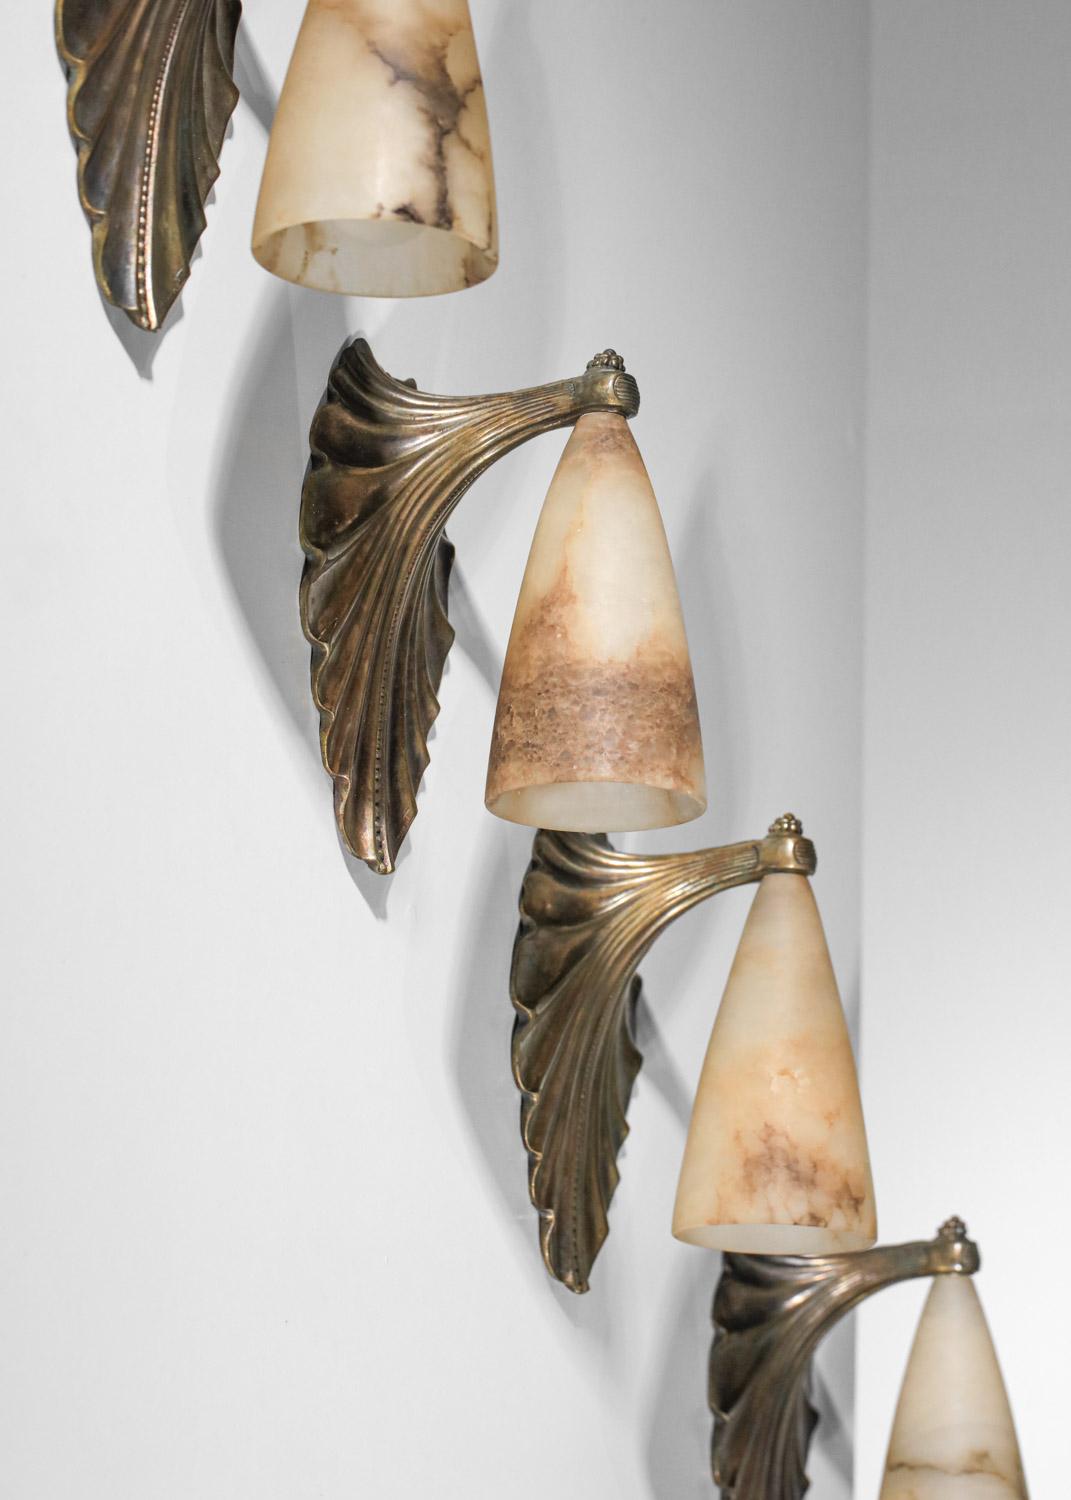 Superb set of four art deco wall sconces by French designer Albert Cheuret dating from the 1930s.  Solid bronze structure and alabaster conical shades. Very fine vintage condition, with a beautiful patina of age on the bonze (see photo). Designer's